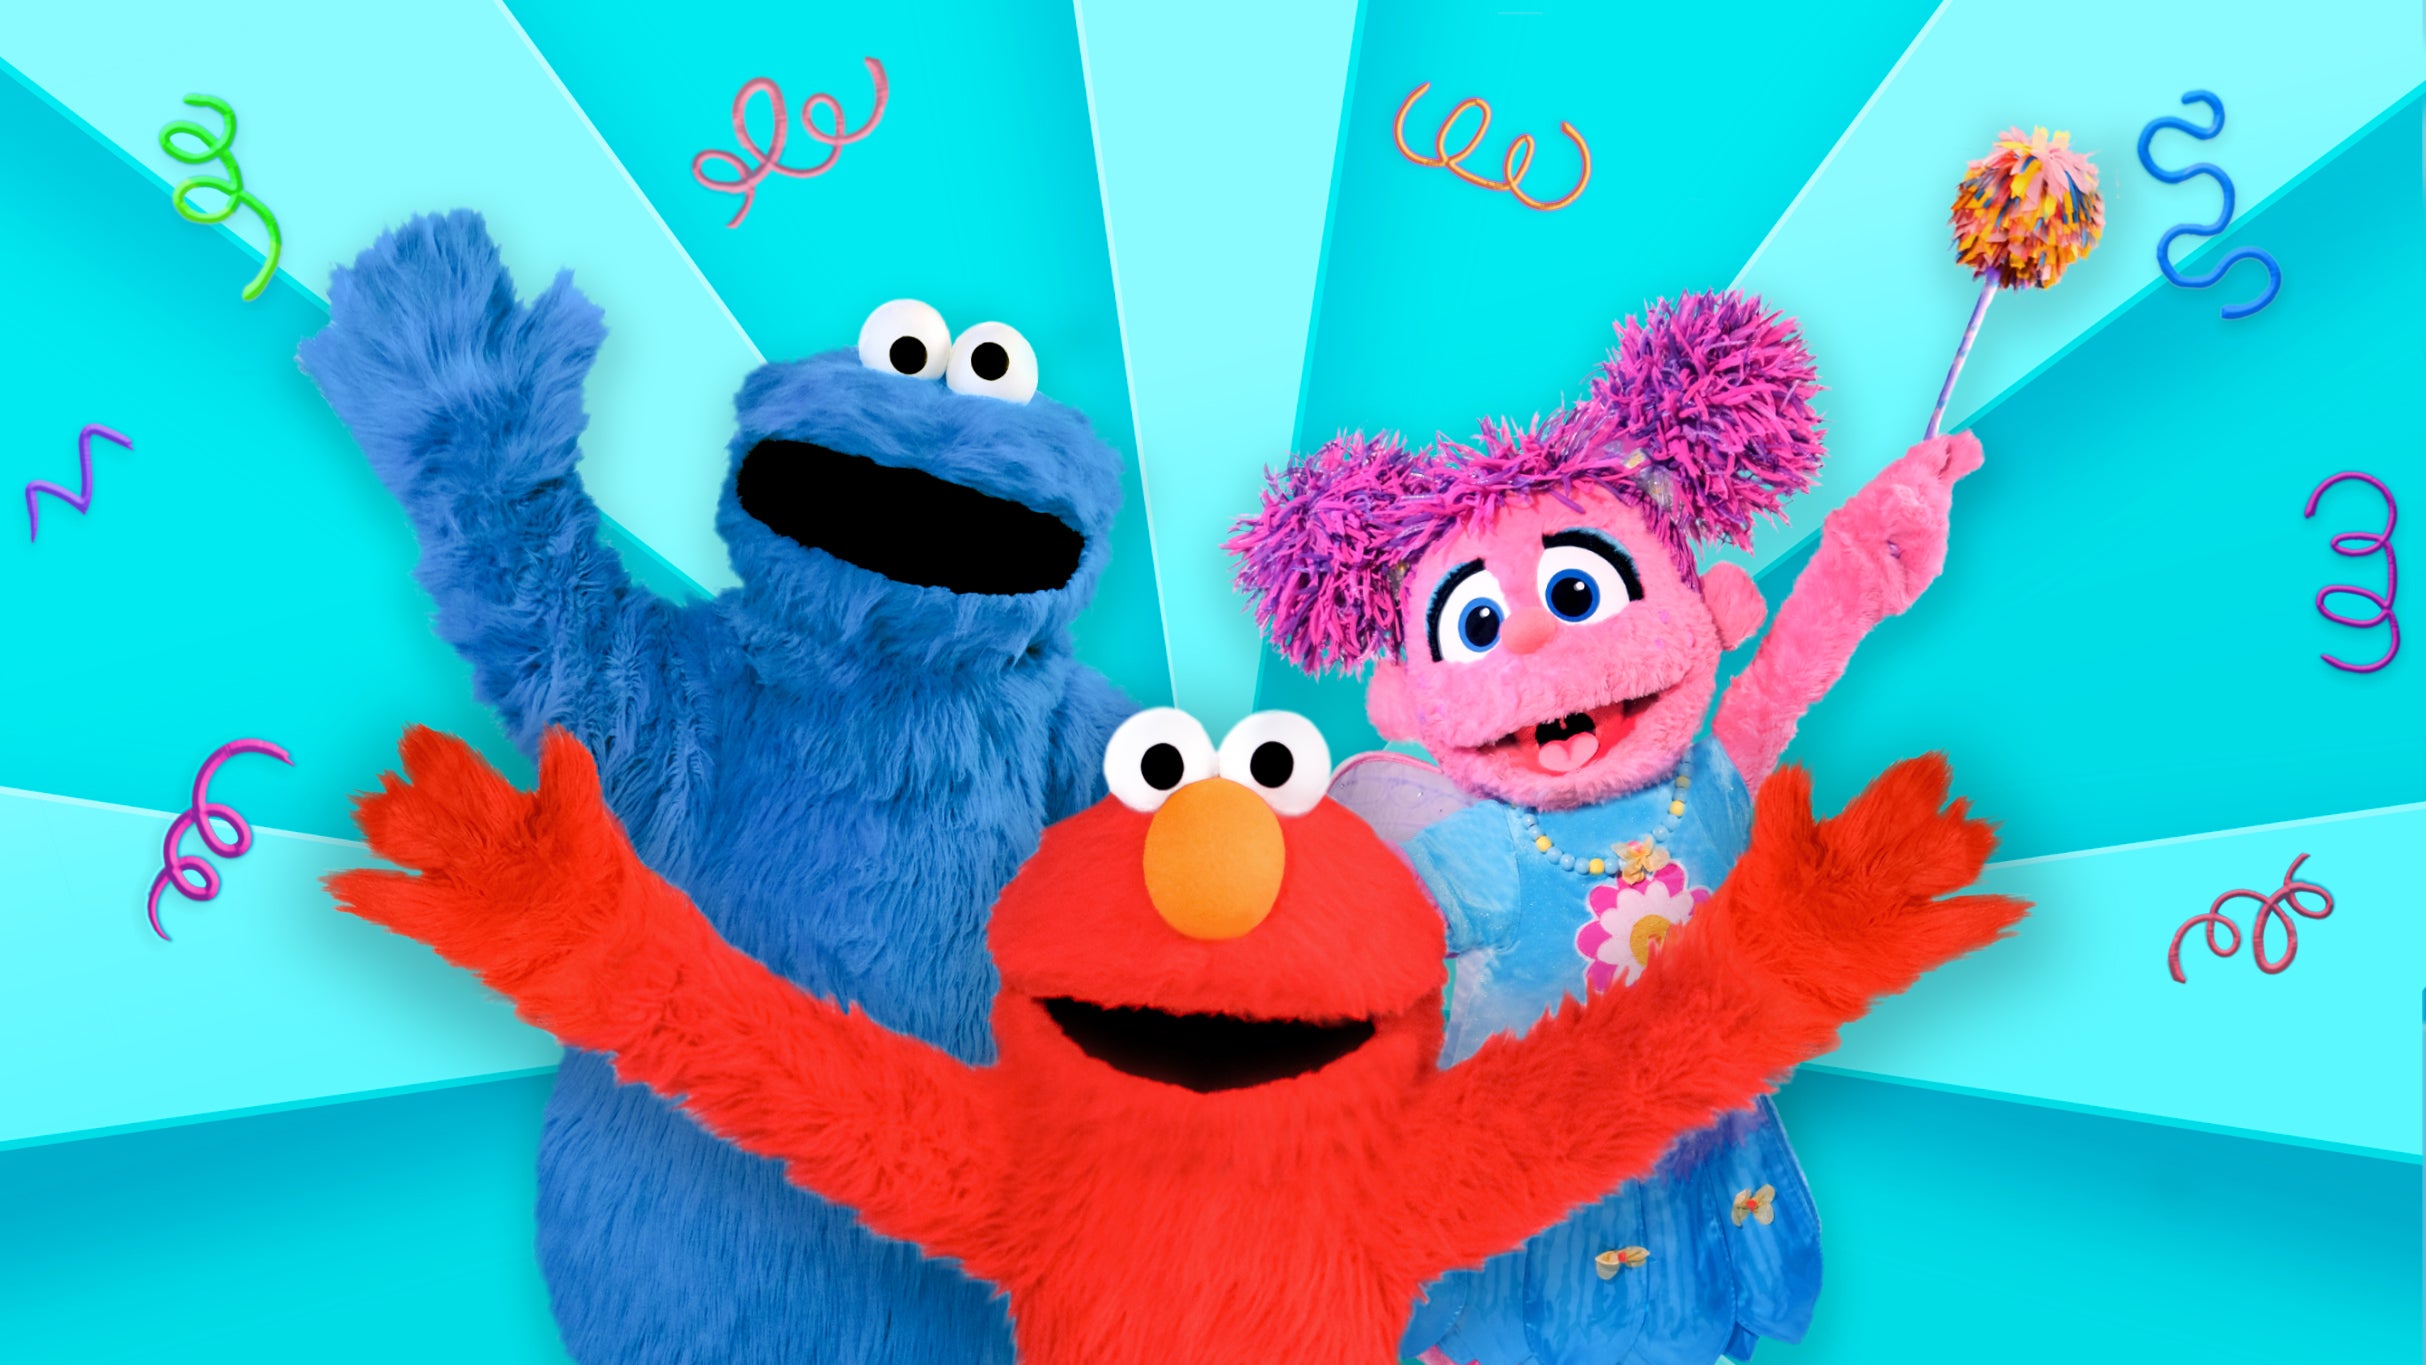 Sesame Street Live! Say Hello free presale code for performance tickets in Davenport, IA (Adler Theatre)